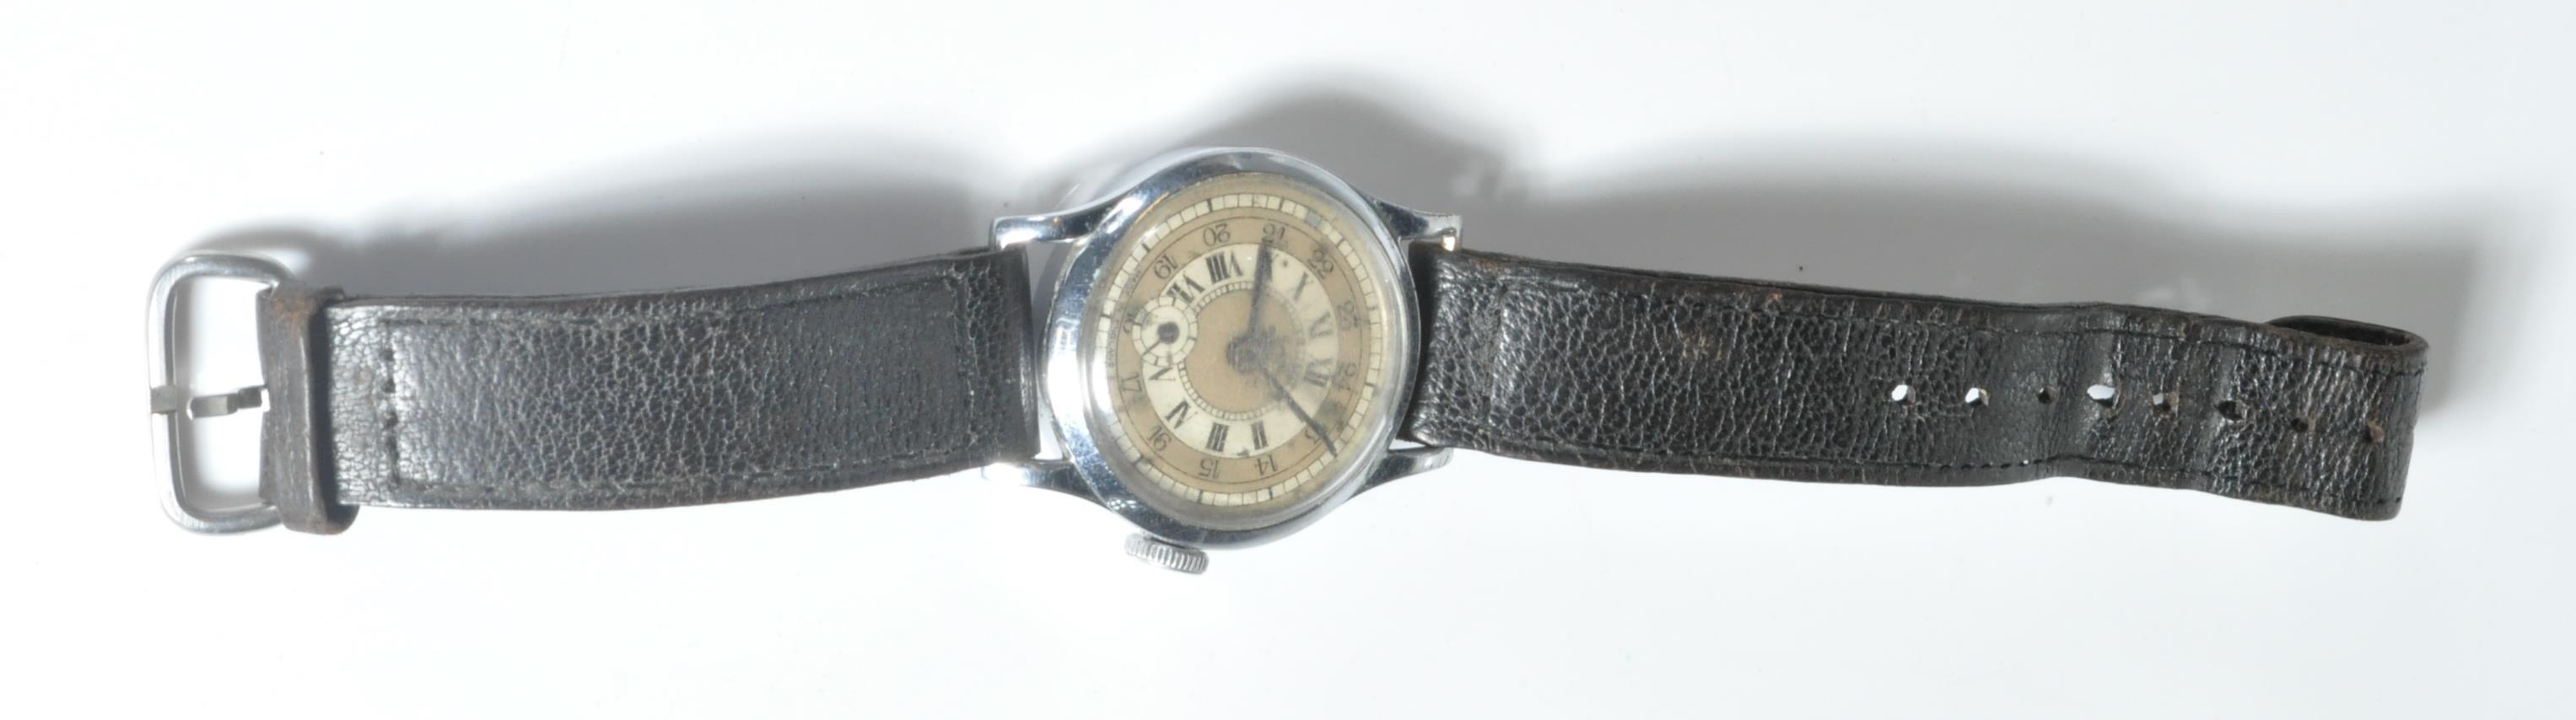 MID 20TH CENTURY SERVICES COLONIAL GENTLEMEN'S WRISTWATCH - Image 11 of 11